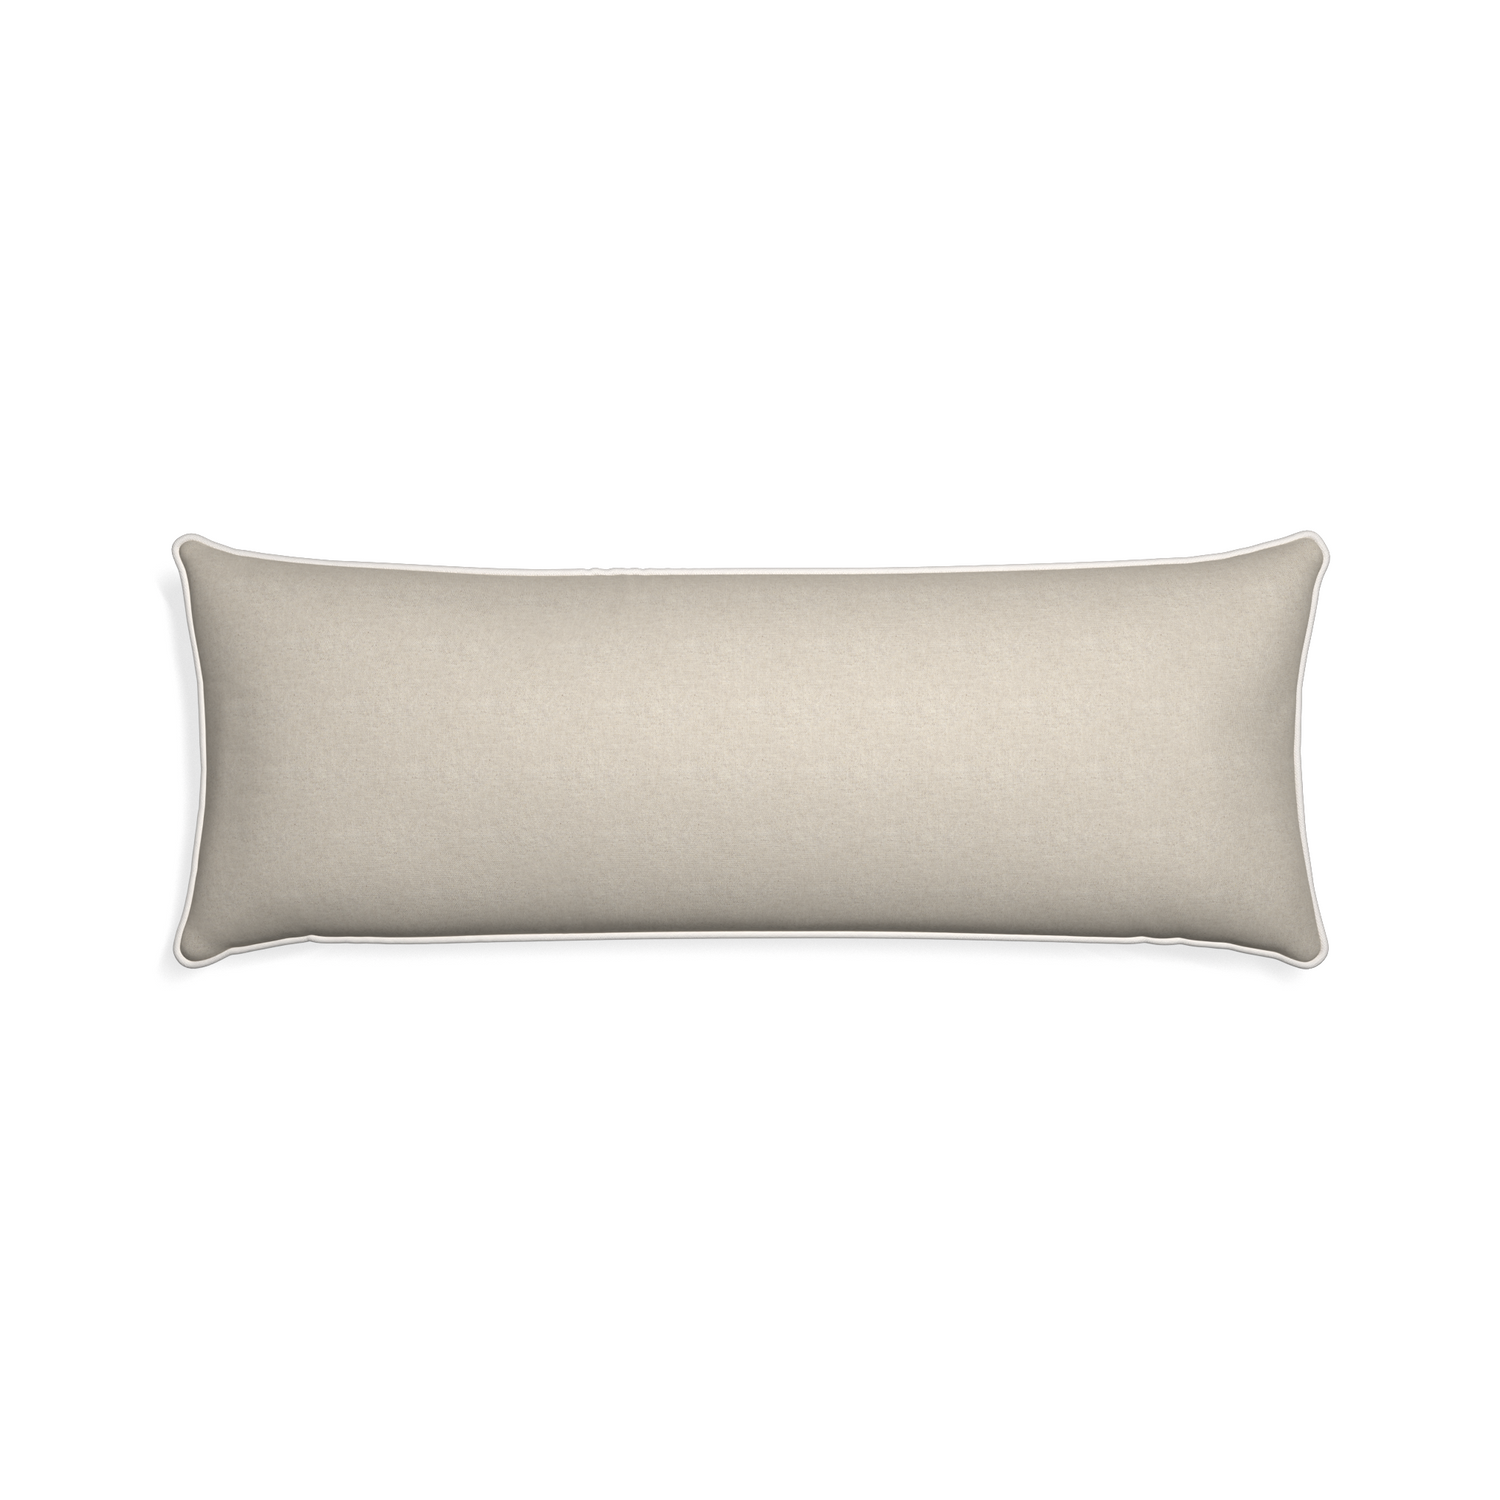 Xl-lumbar oat custom pillow with snow piping on white background